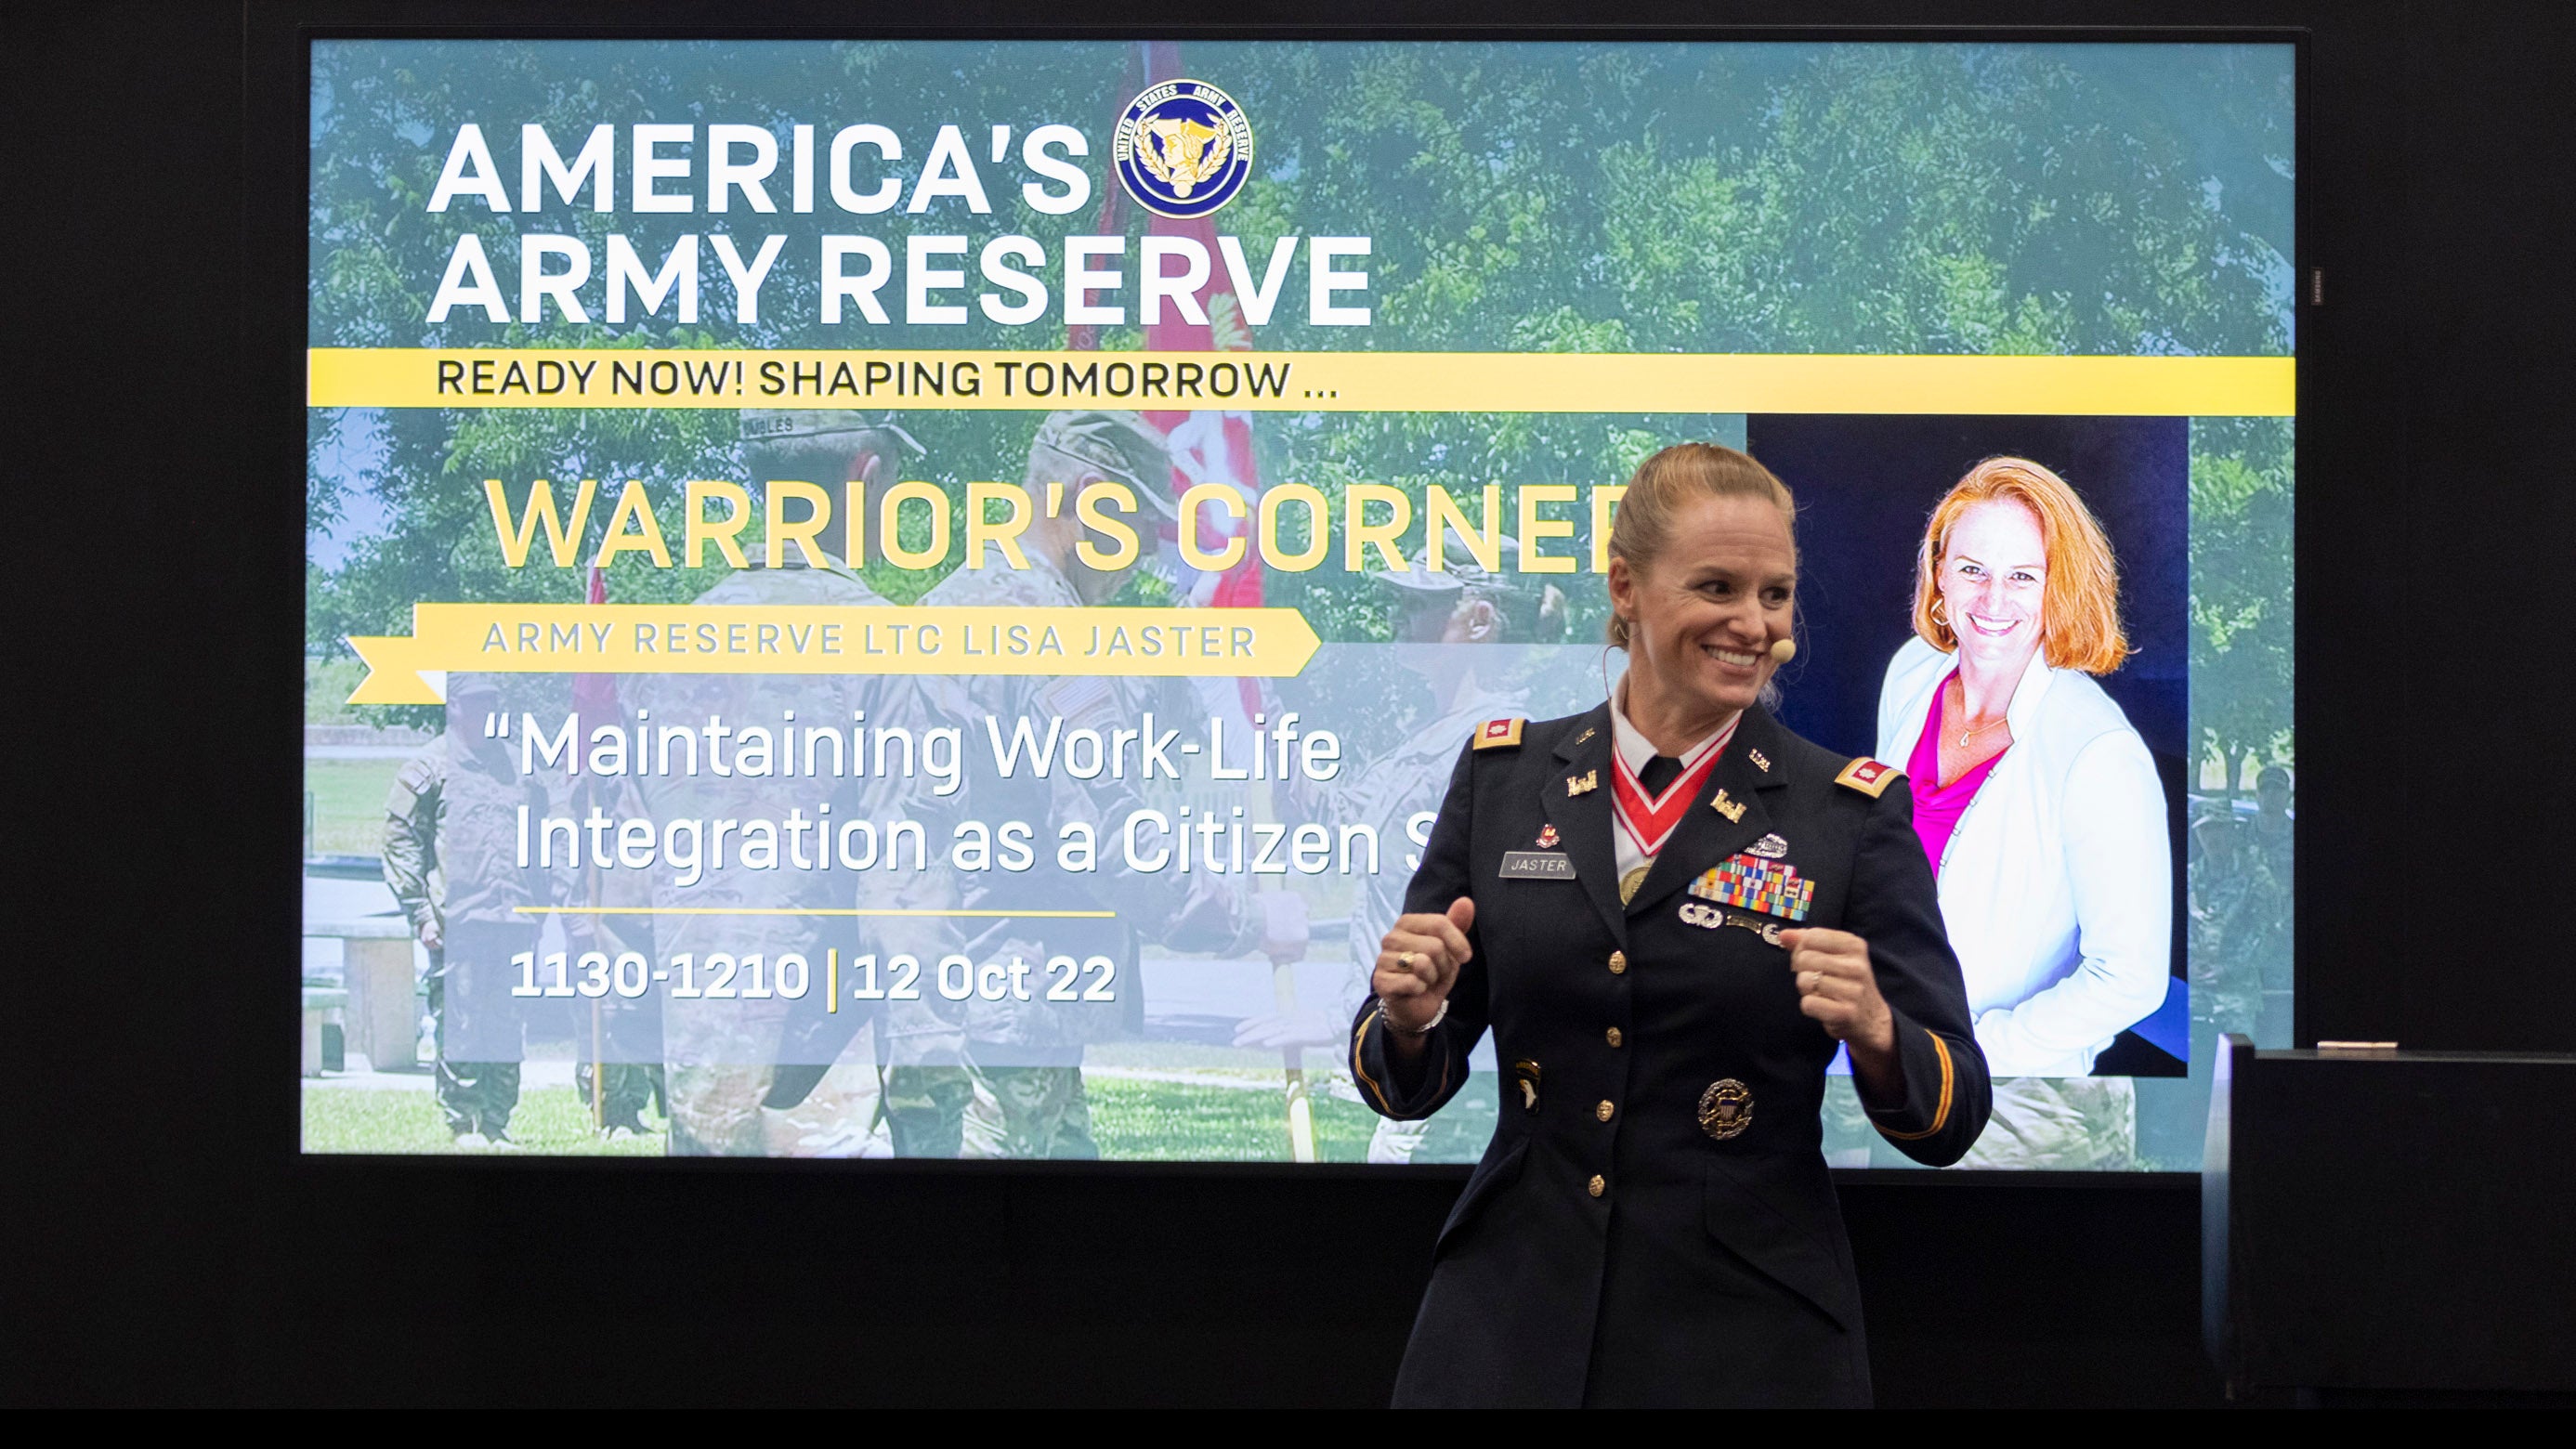 Lt. Col. Lisa Jaster speaks at the Warriors Corner about work-life balance at the AUSA 2022 Annual Meeting in Washington, D.C., Wednesday, Oct. 12, 2022. (Tasos Katopodis for AUSA)